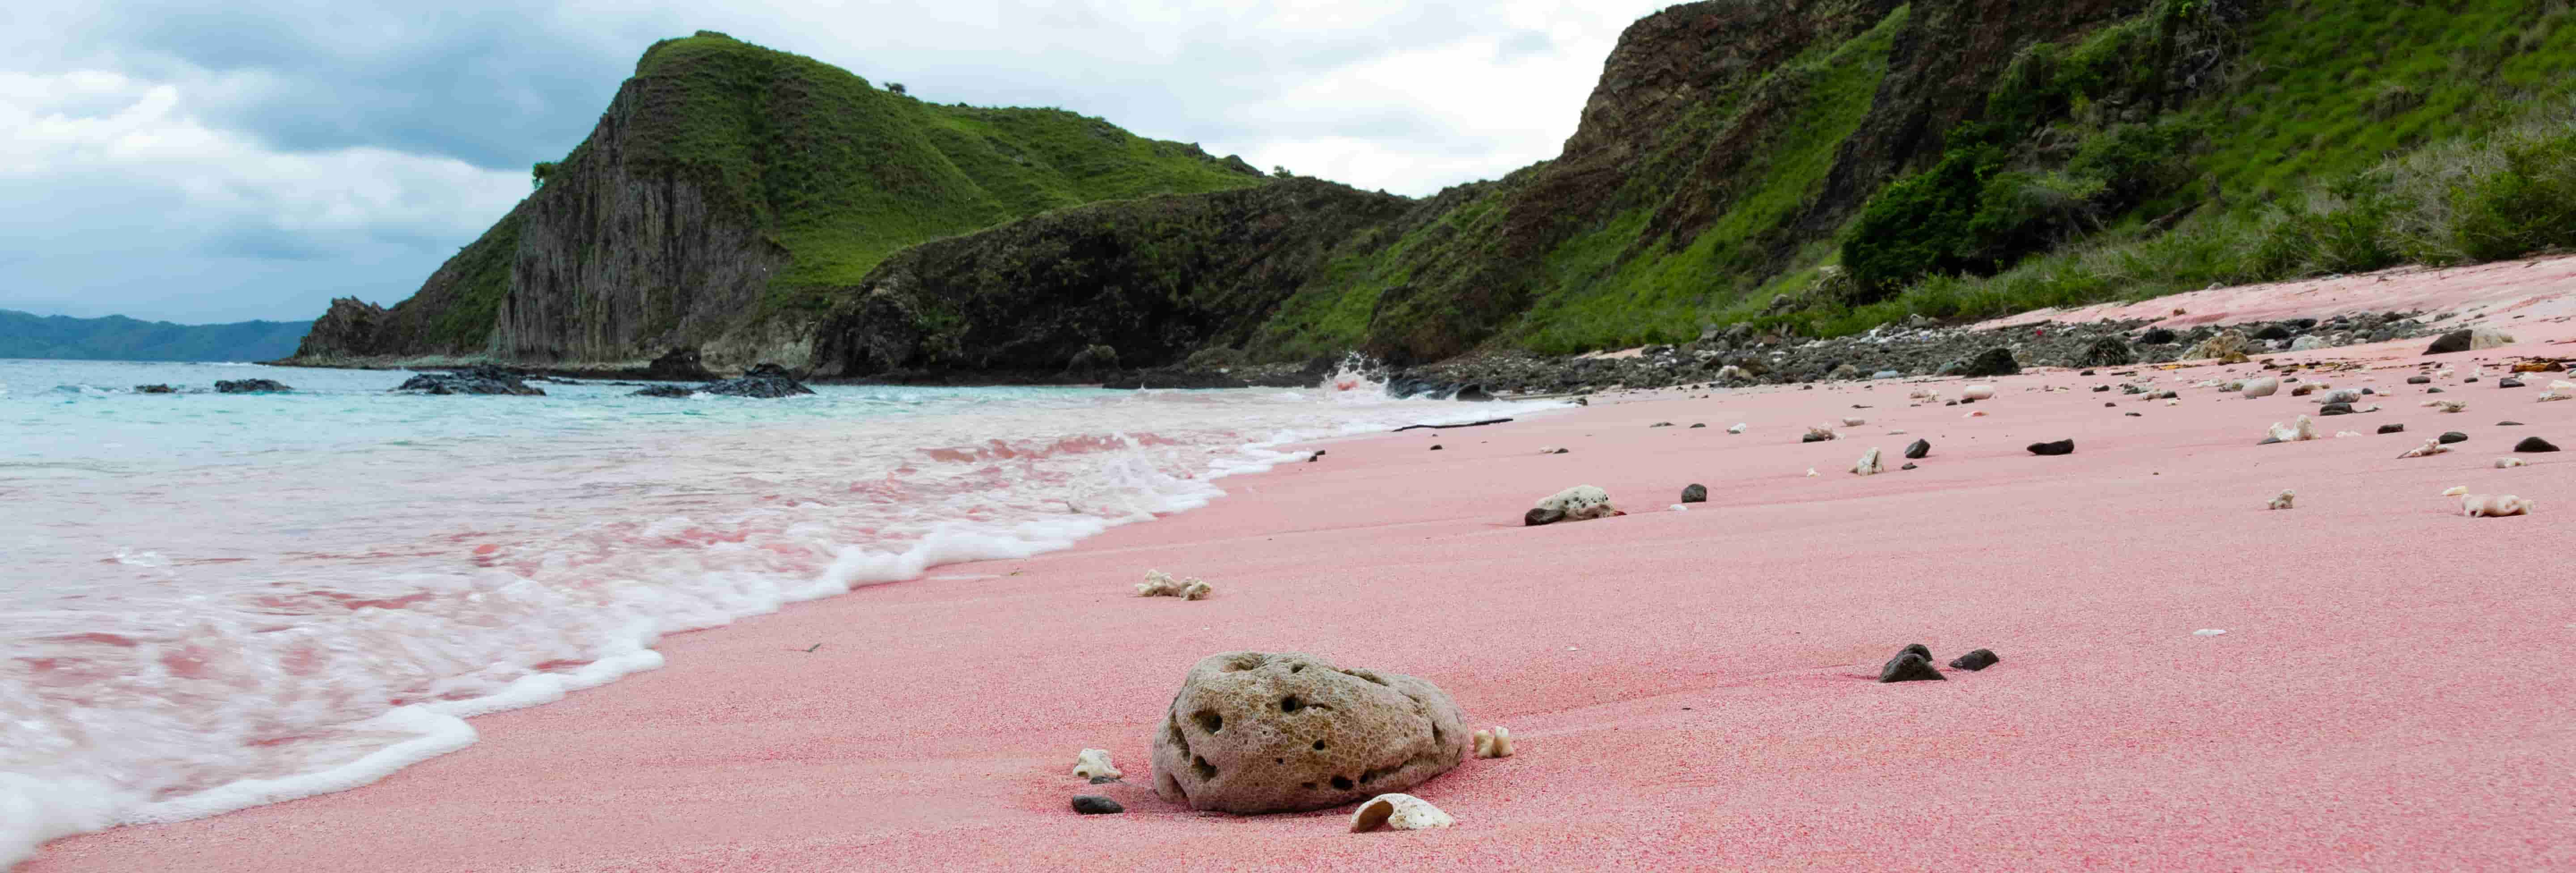 15 Stunning Pink Sand Beaches In The World To Experience